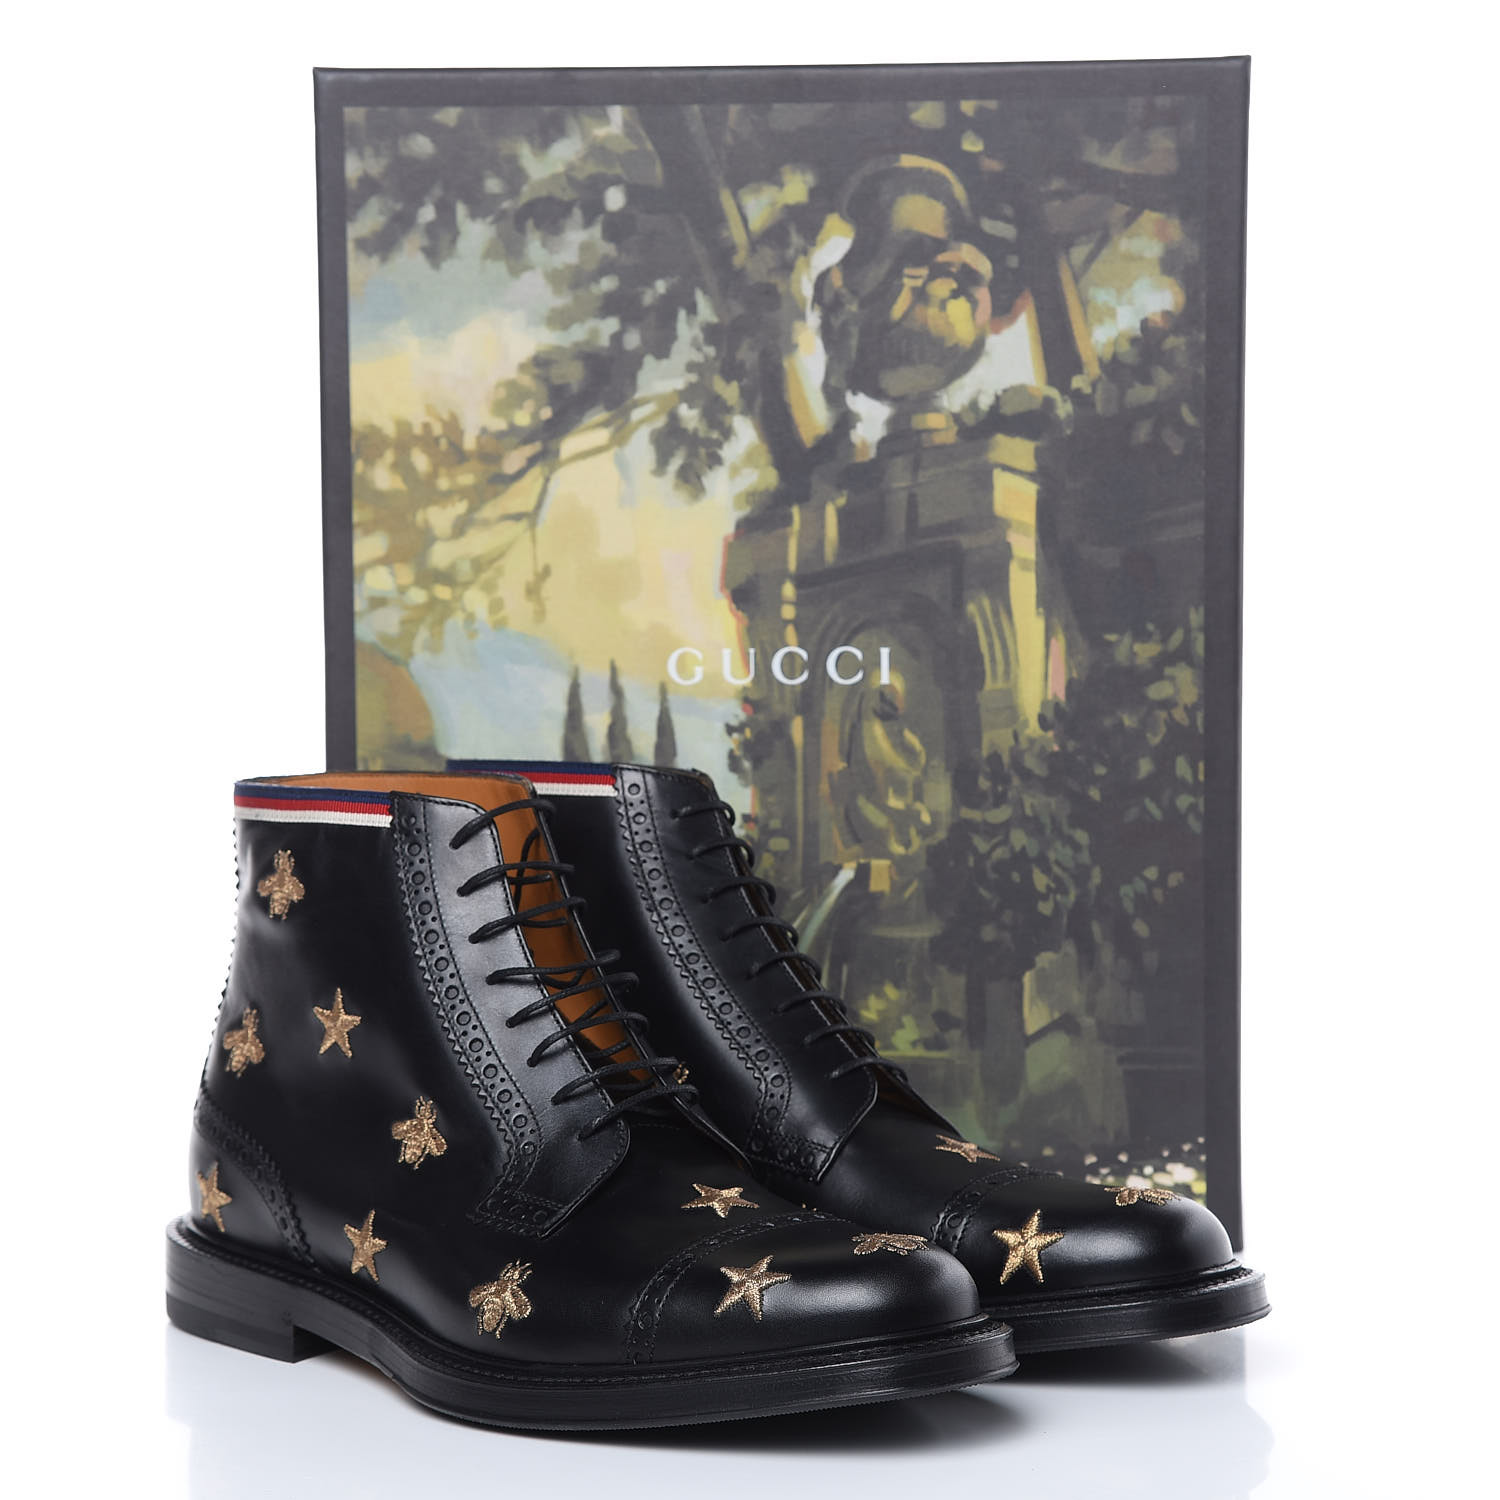 GUCCI Calfskin Mens Embroidered Bee Star Brogue Boots 7.5 Black 434406